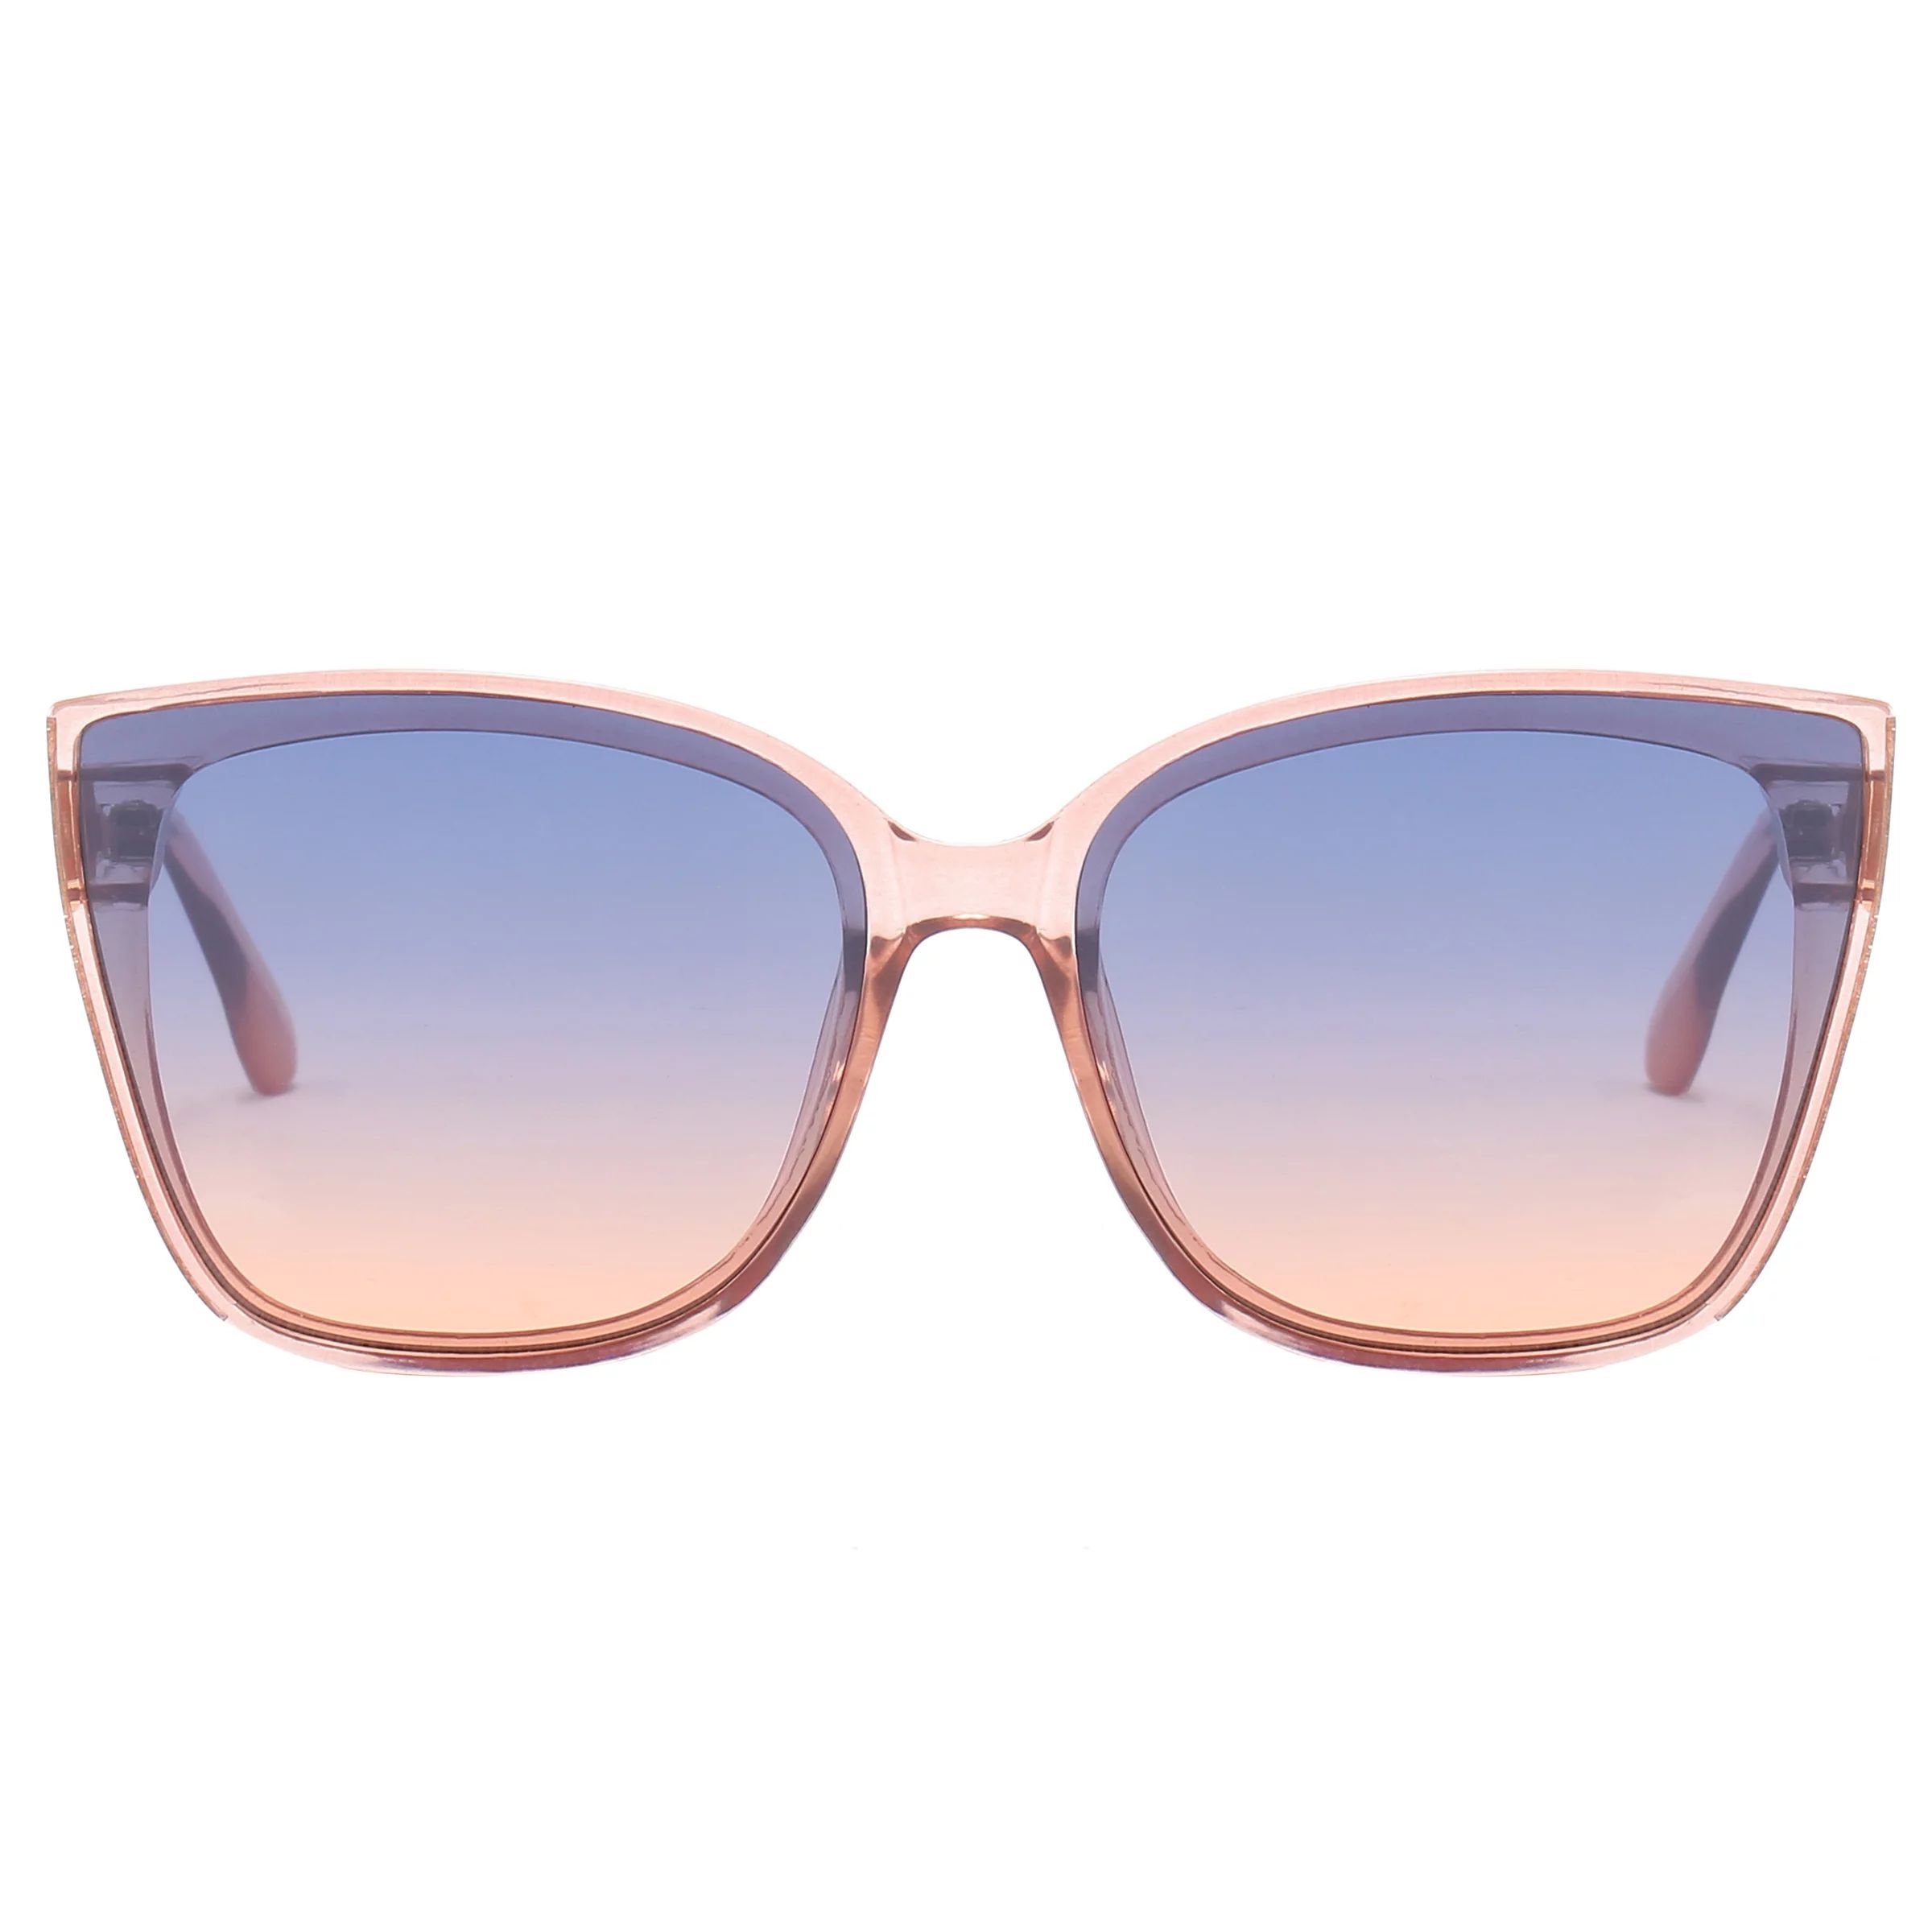 Piranha Eyewear Bloom Eco-Pact Sunglasses for Women with Blue to Peach Ombre Lens | Walmart (US)